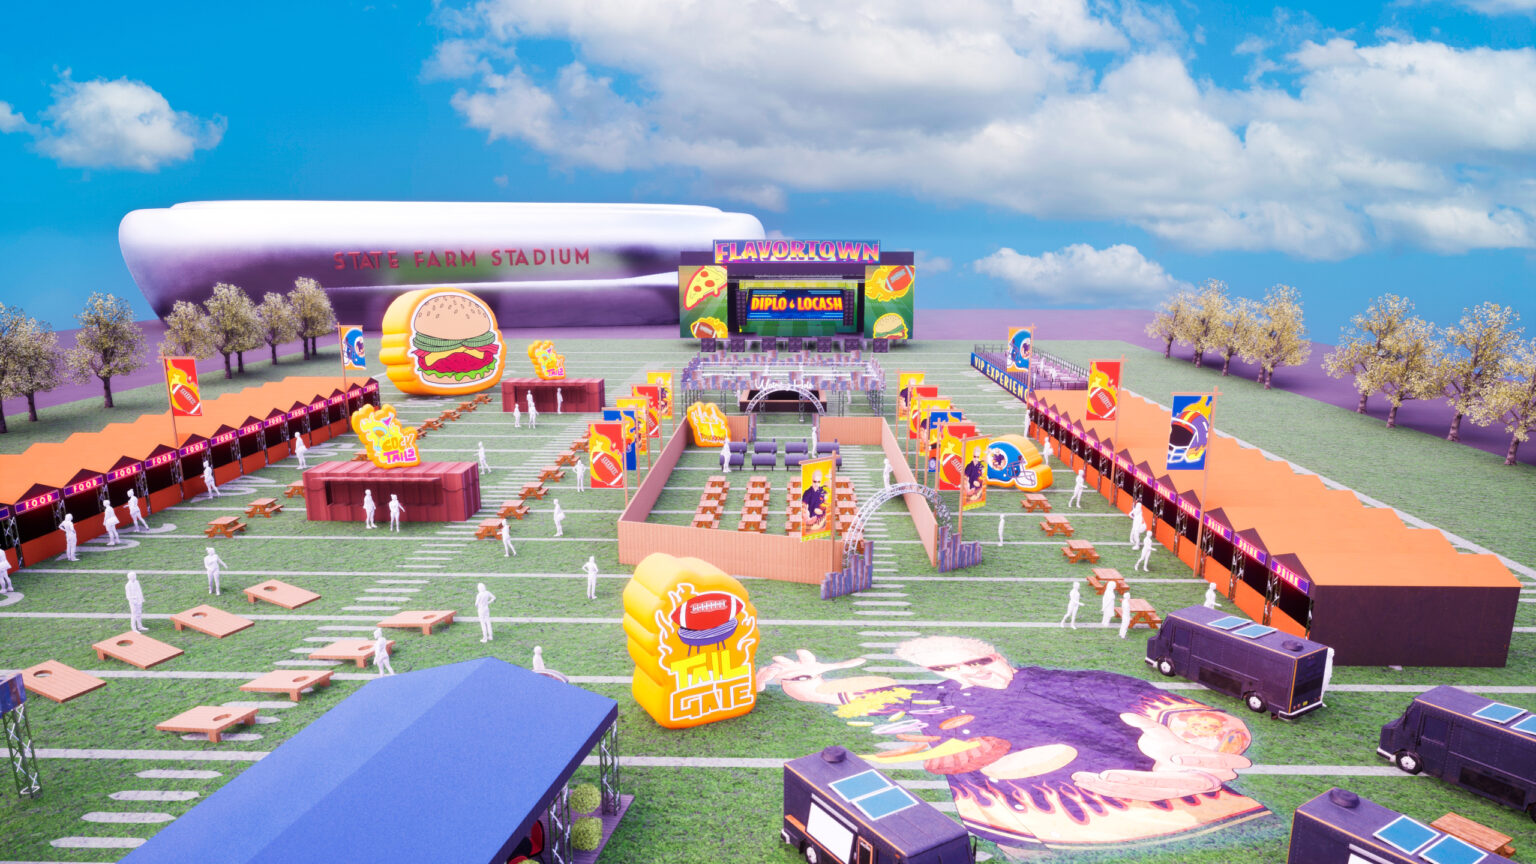 A rendering of the setup of the tailgate event. (Courtesy)